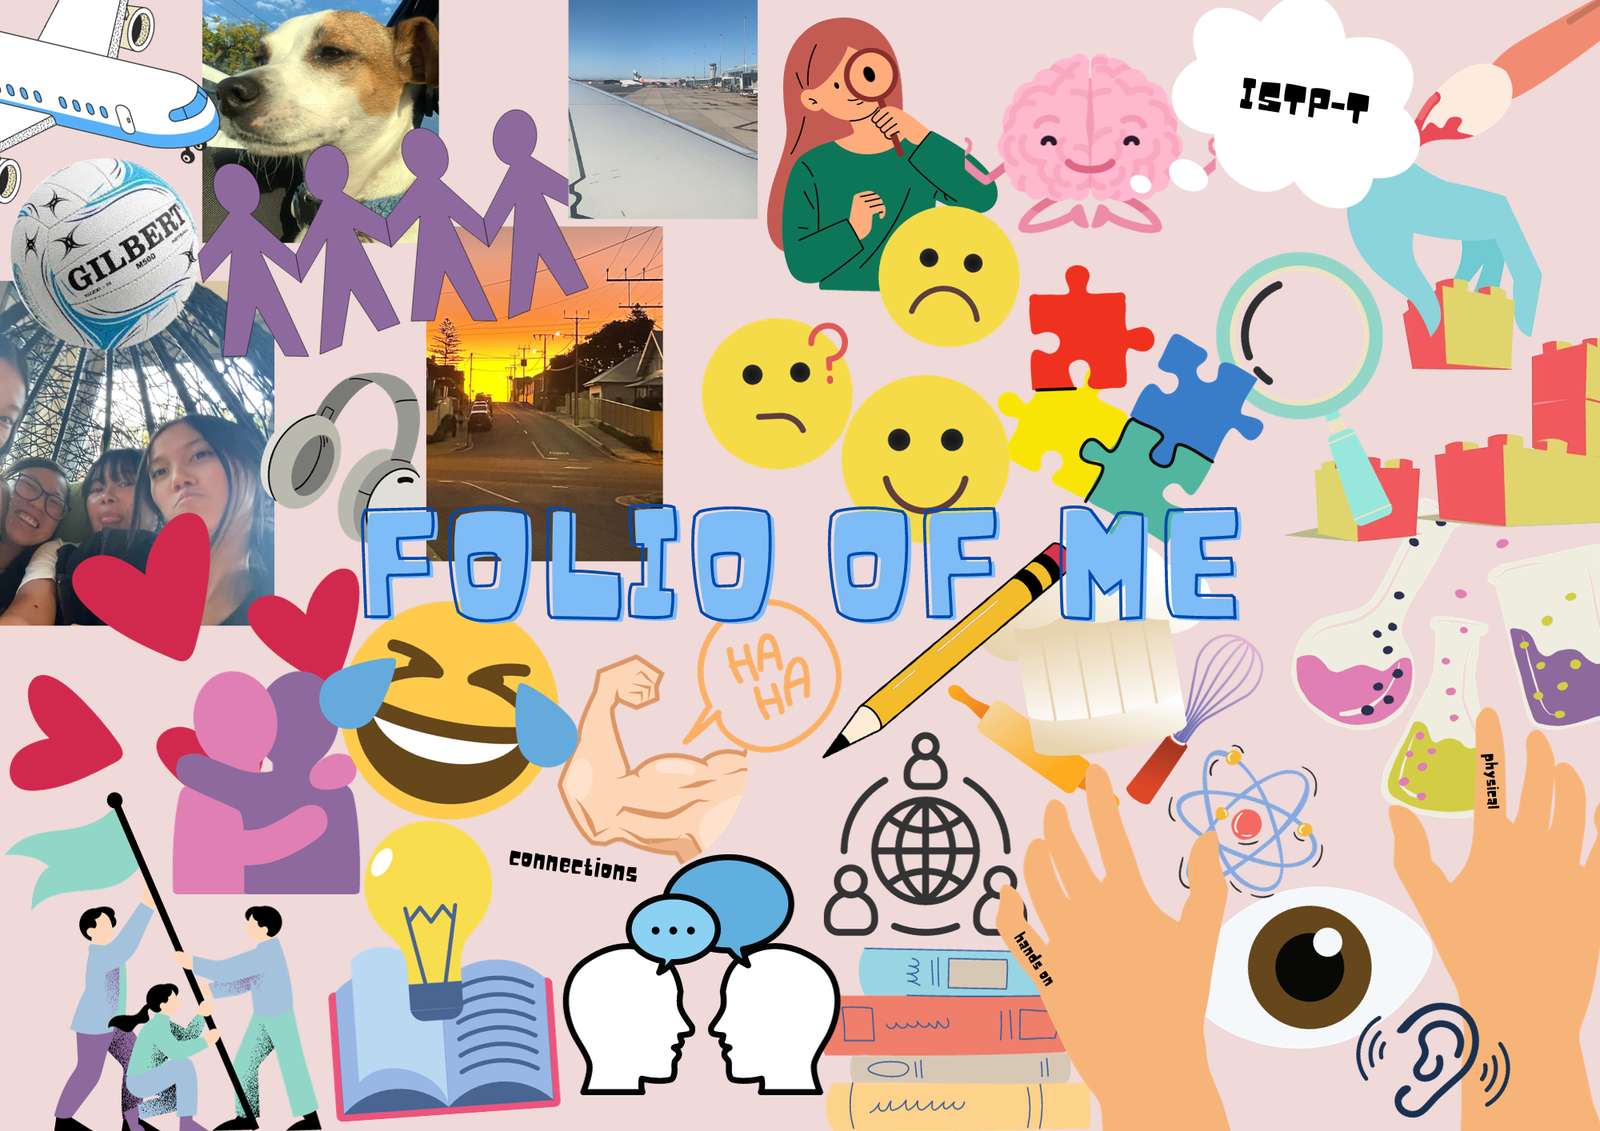 Folio of Me puzzle online from photo